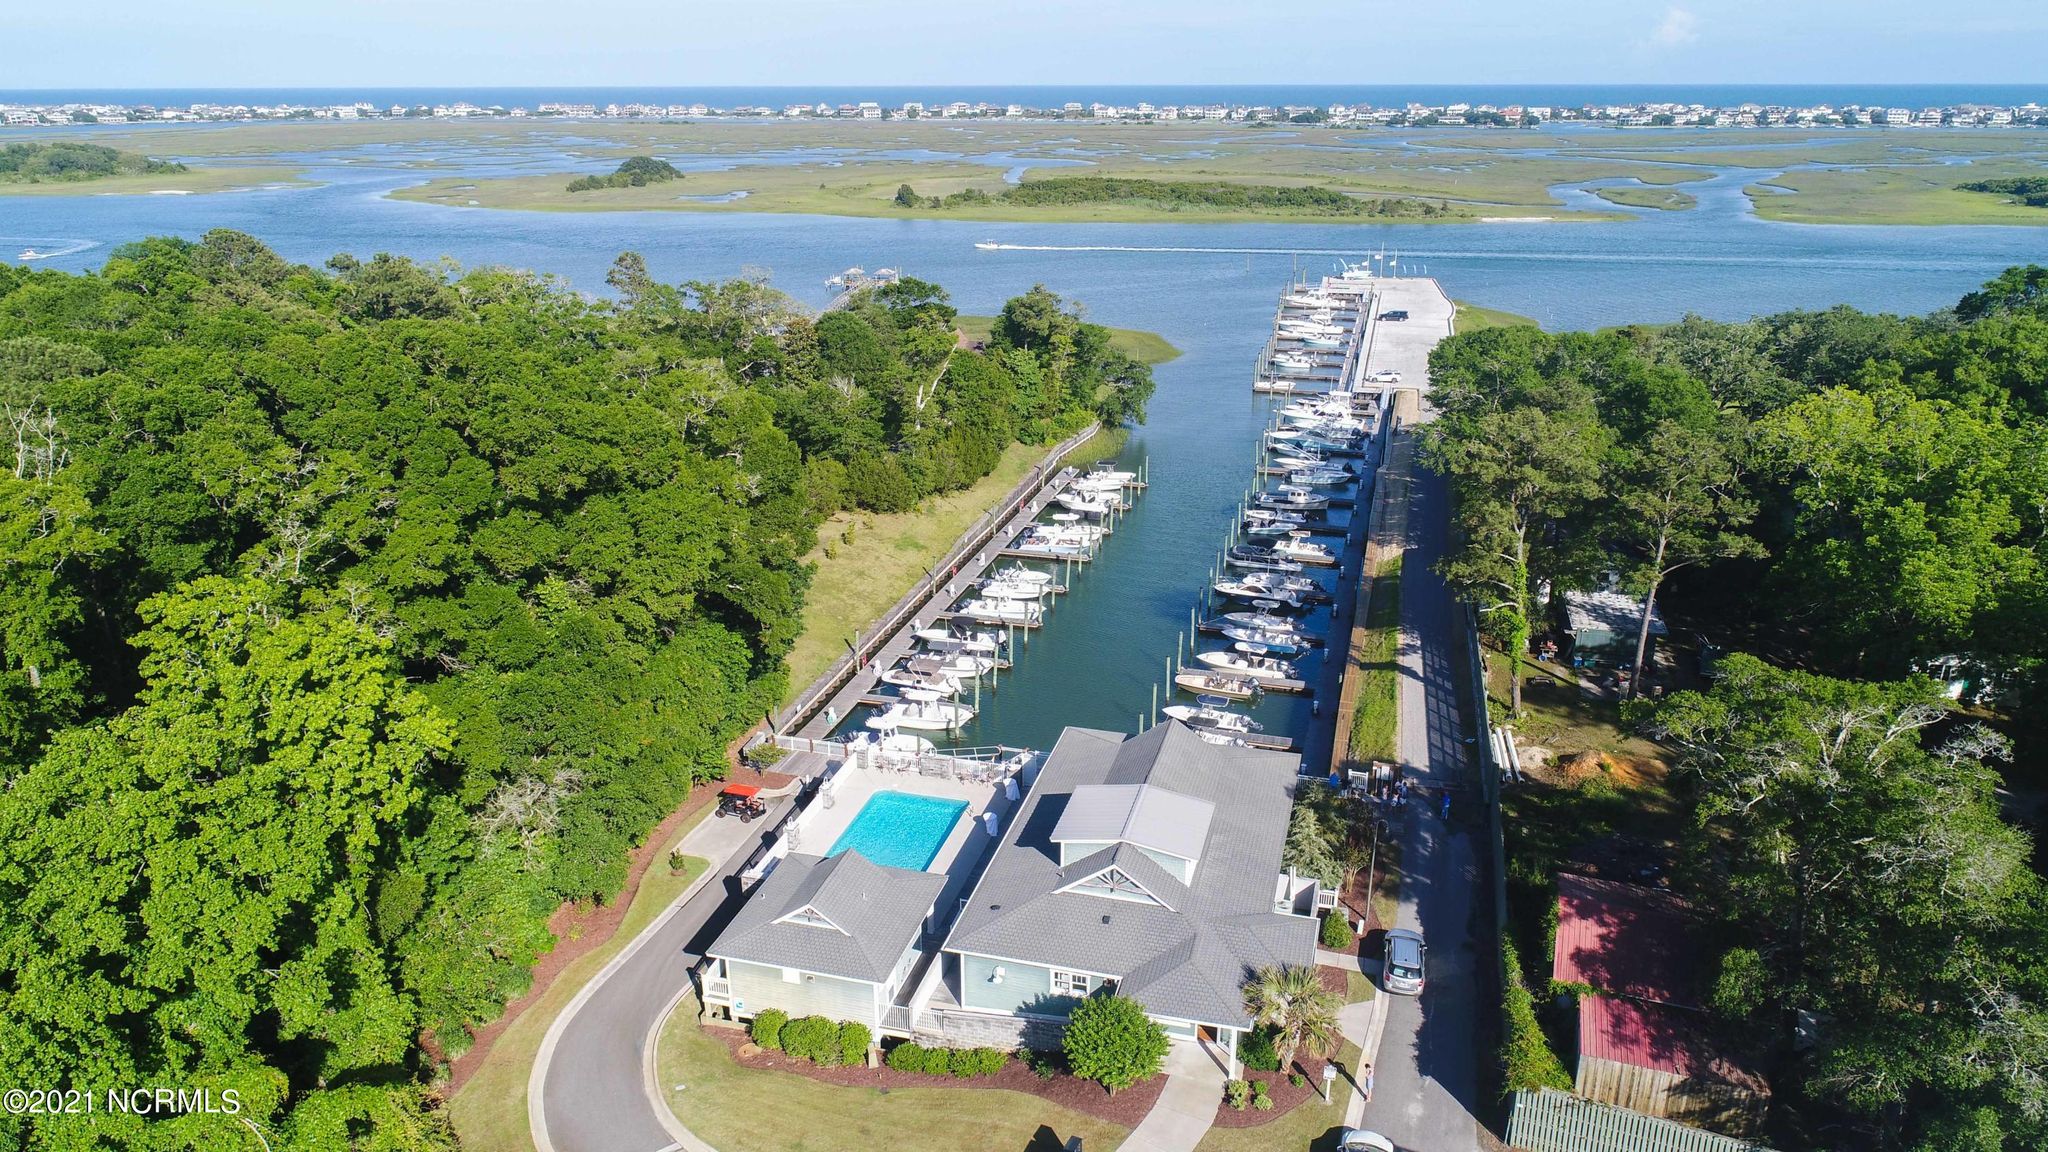 yachts for rent in wilmington nc